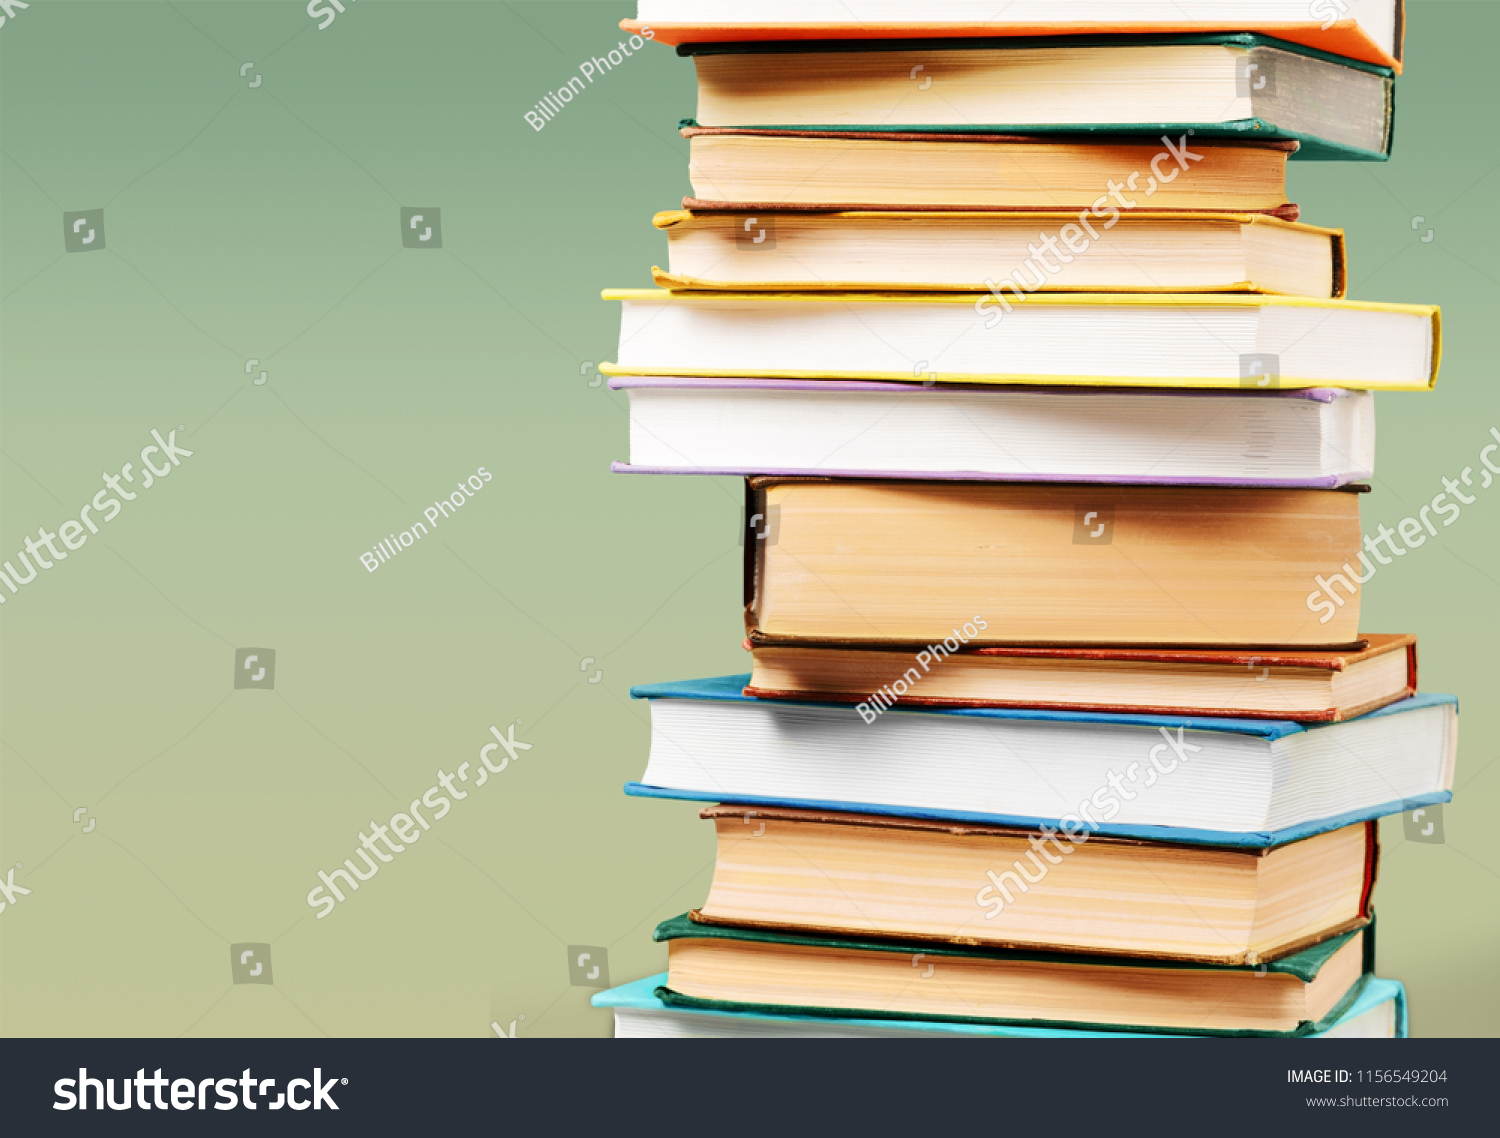 Collection of old books vertical stack #1156549204